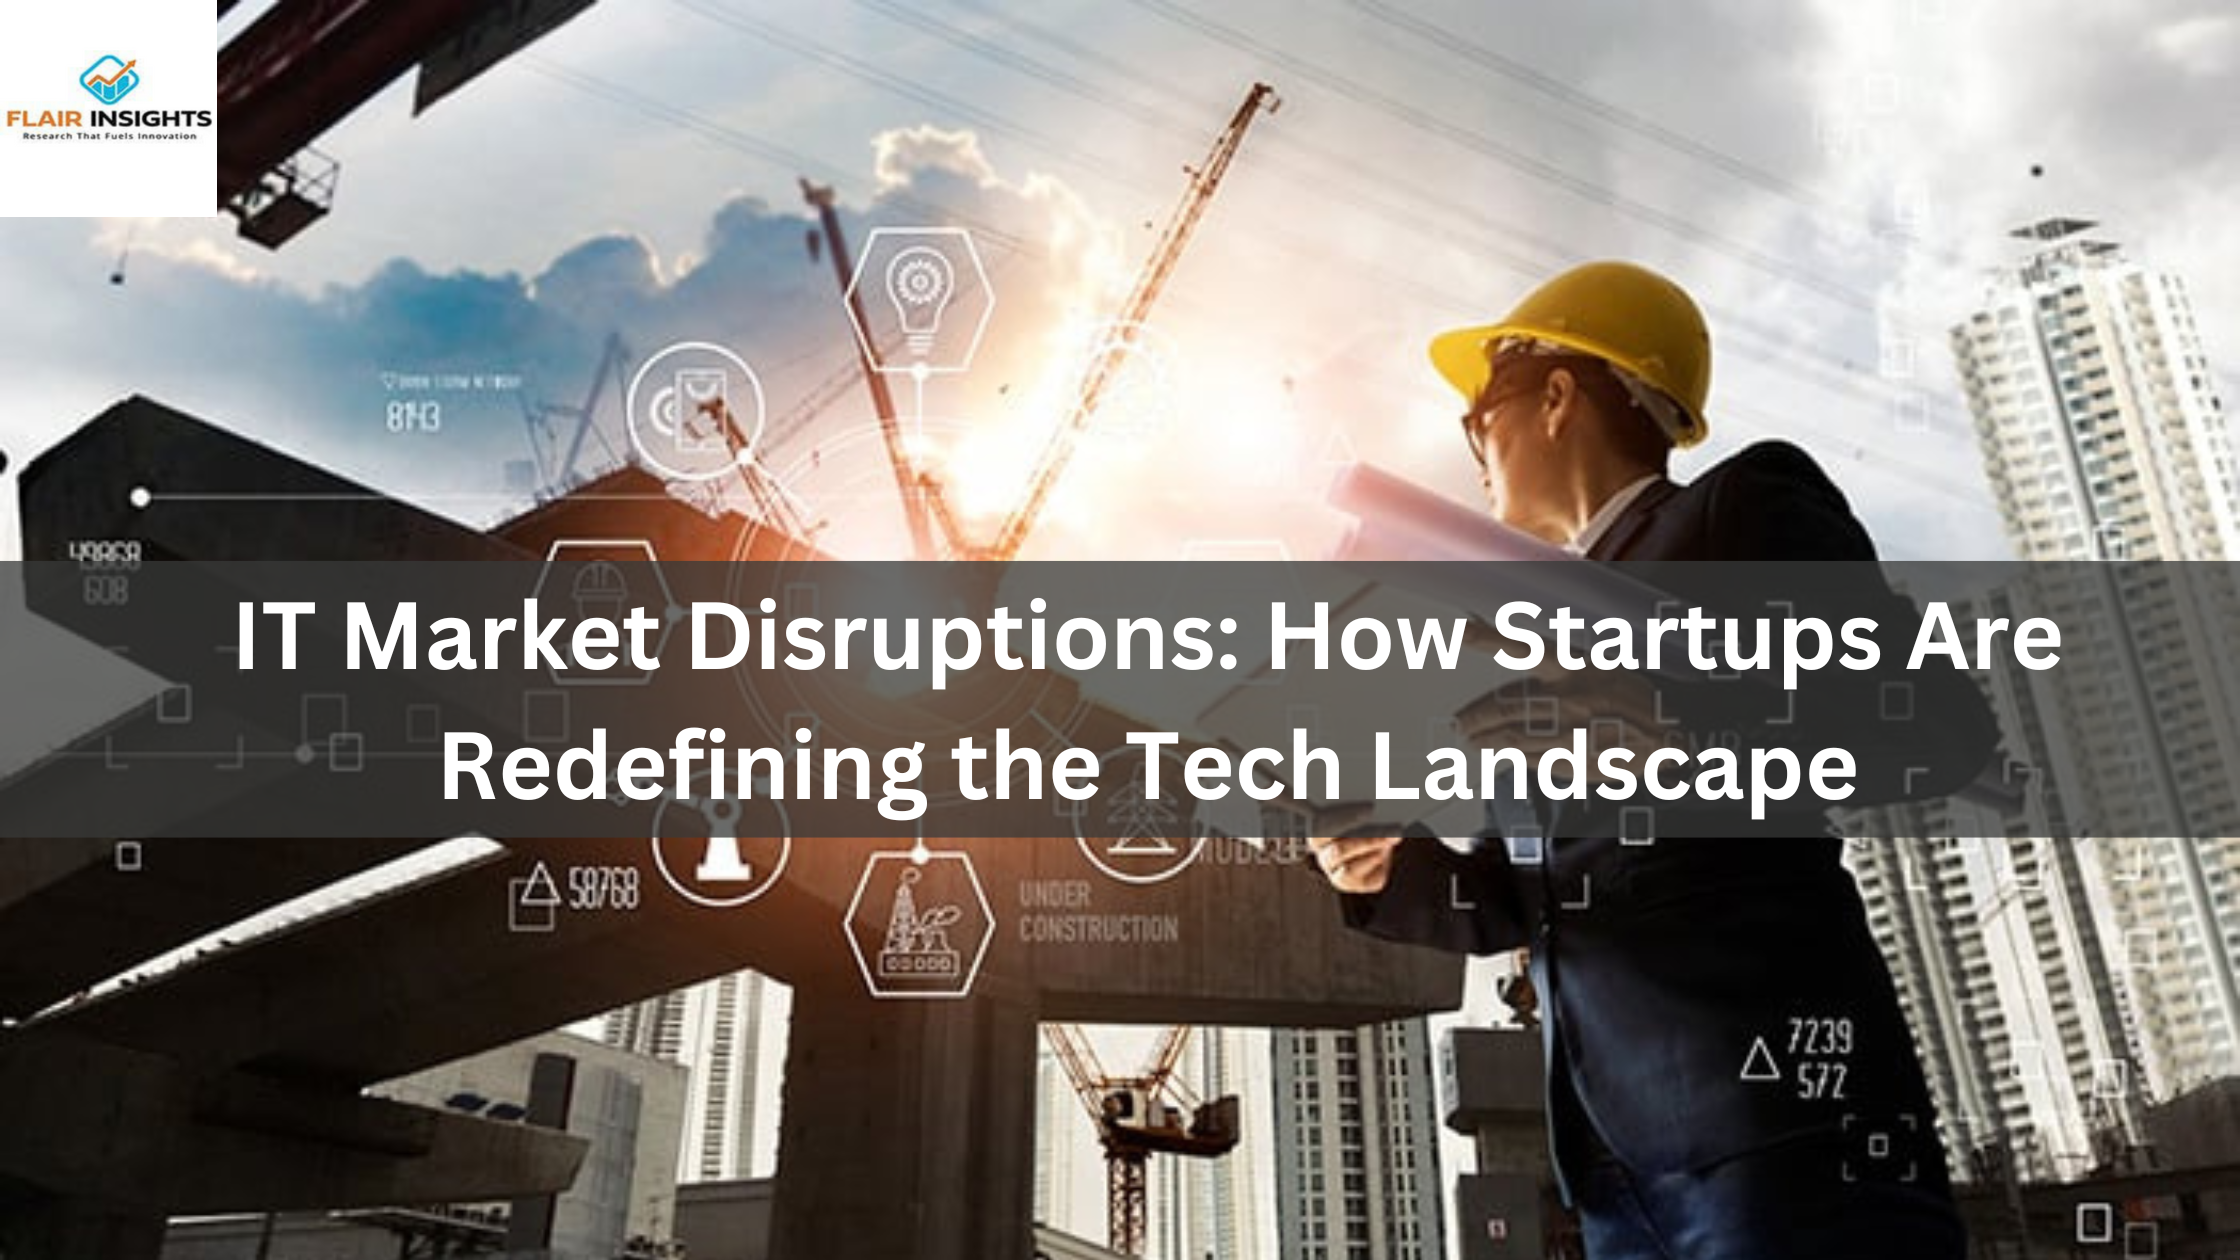 IT Market Disruptions: How Startups Are Redefining the Tech Landscape